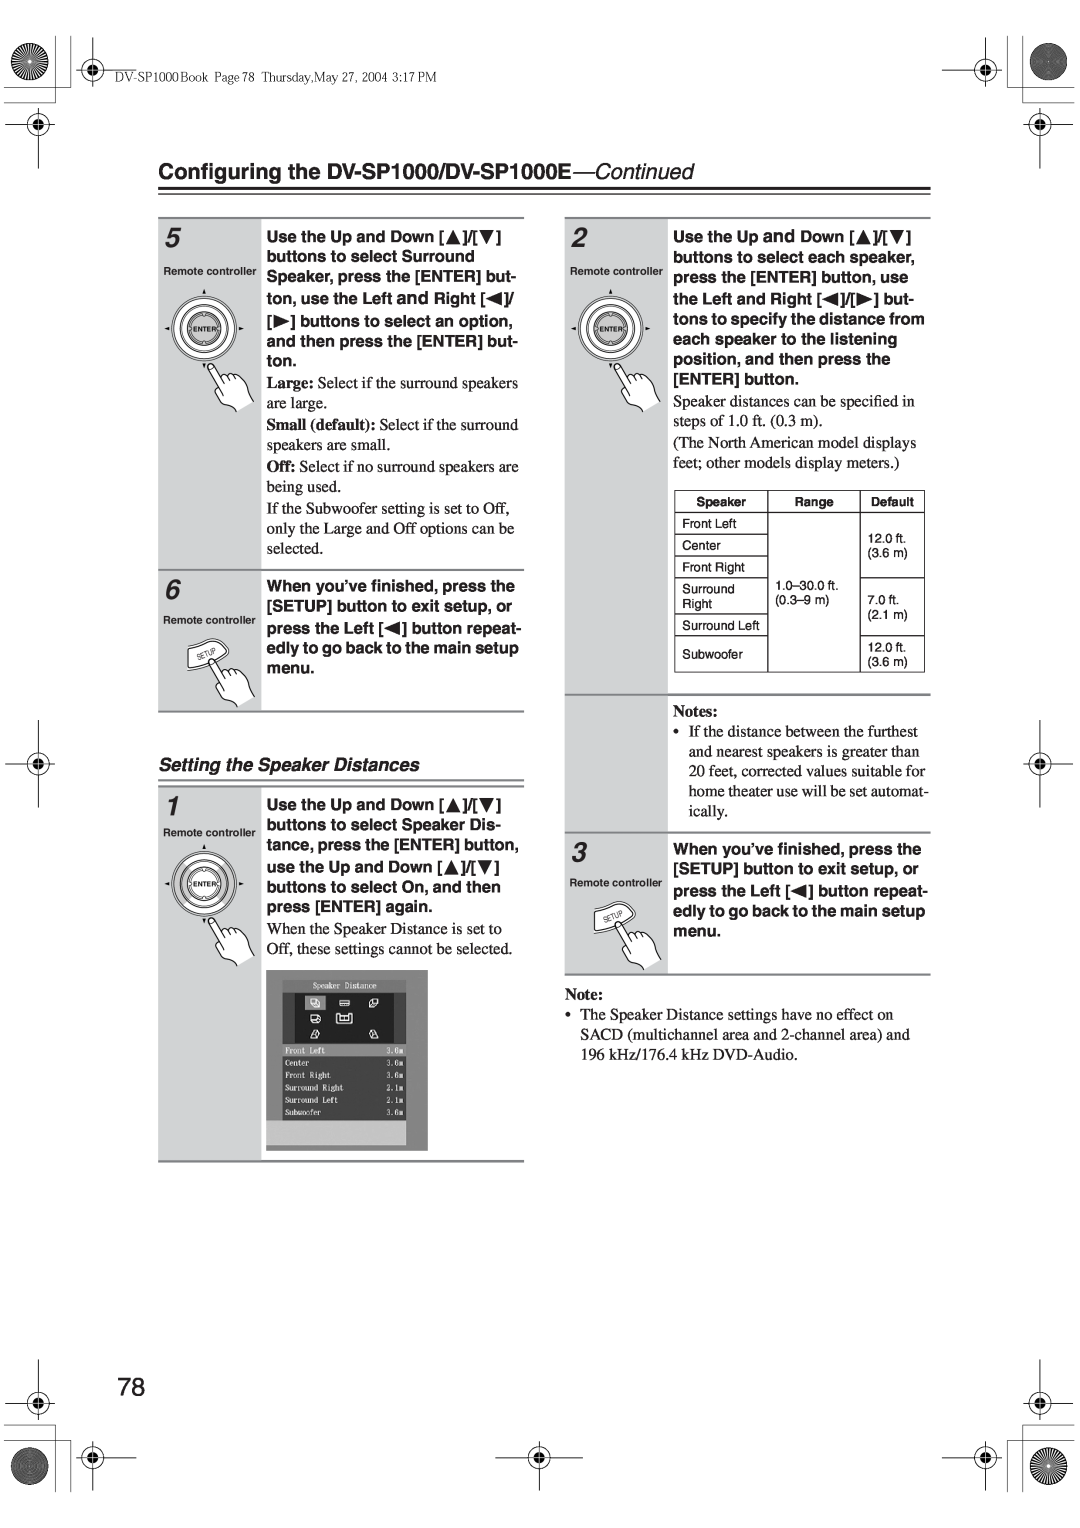 Onkyo instruction manual Setting the Speaker Distances, Conﬁguring the DV-SP1000/DV-SP1000E—Continued 